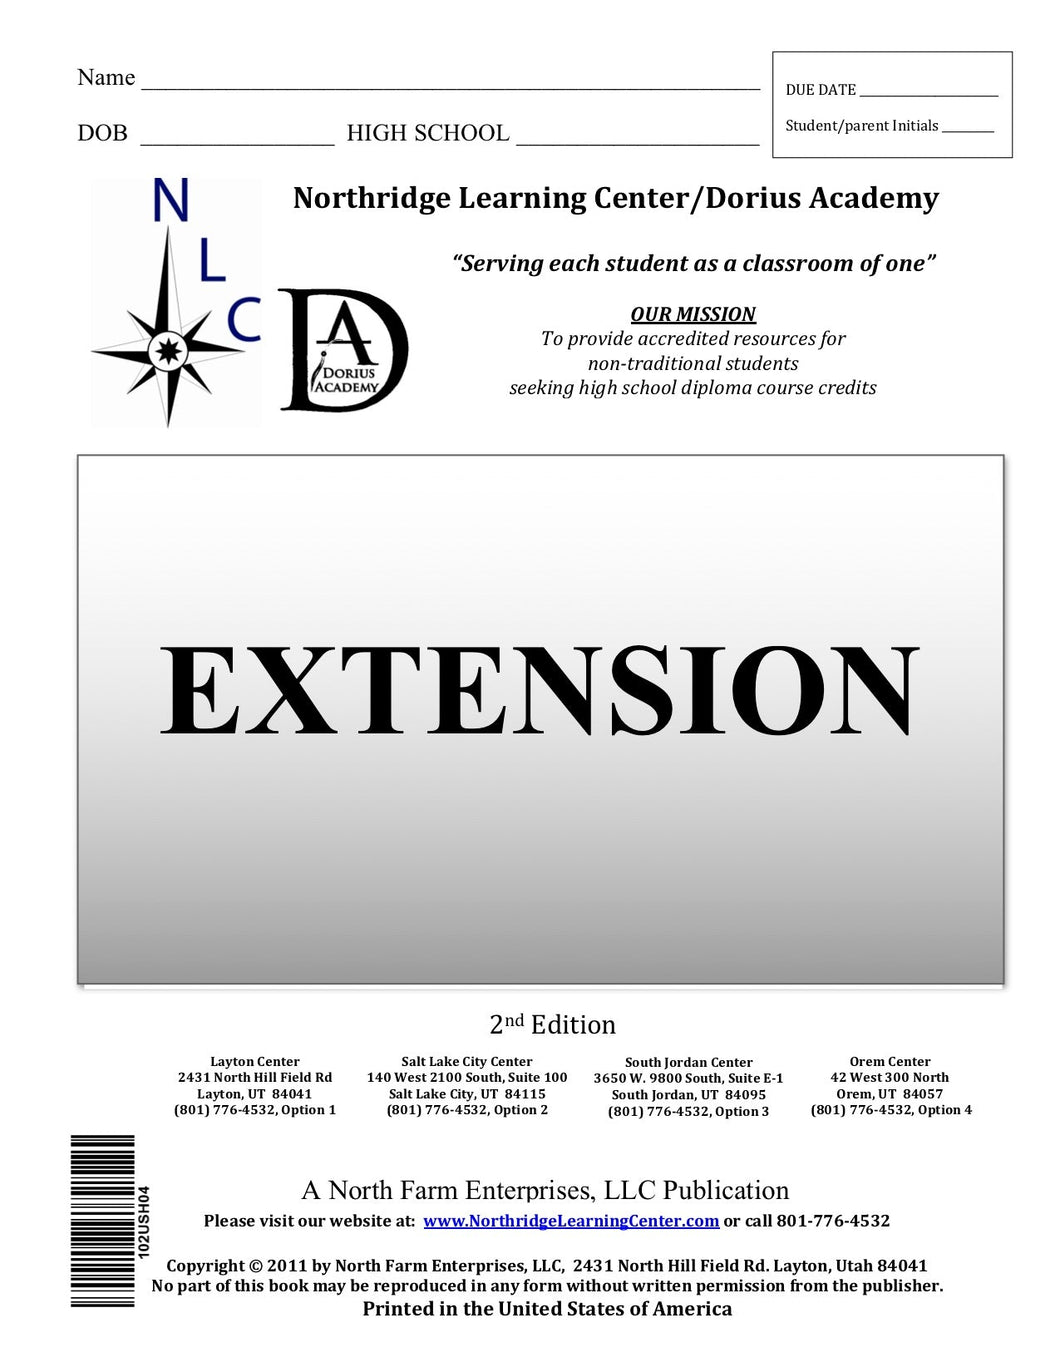 CC Math, Secondary 2, Section I - Extension